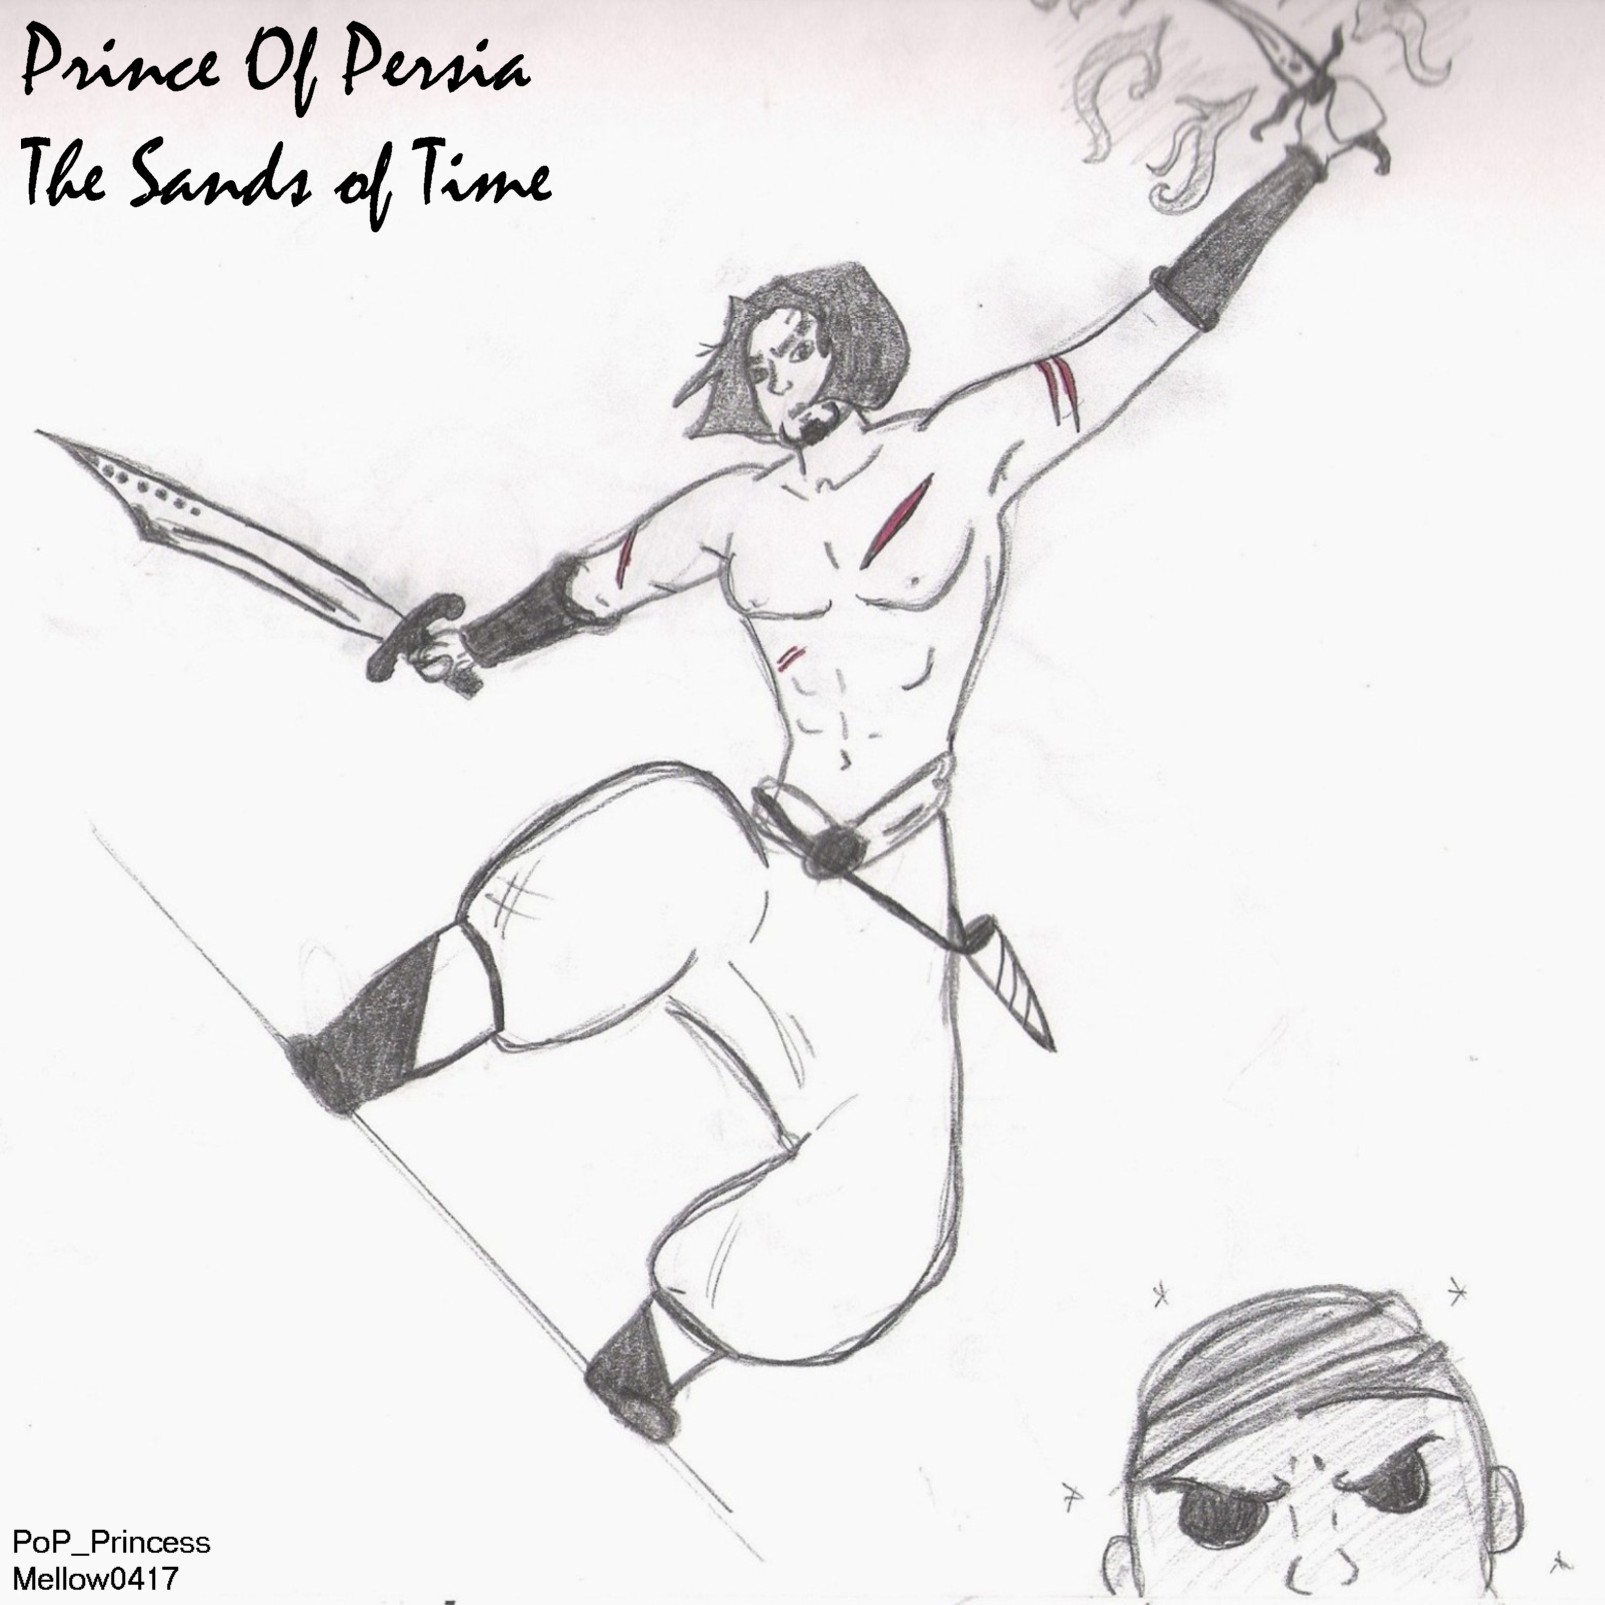 Prince of Persia by Mellow0417